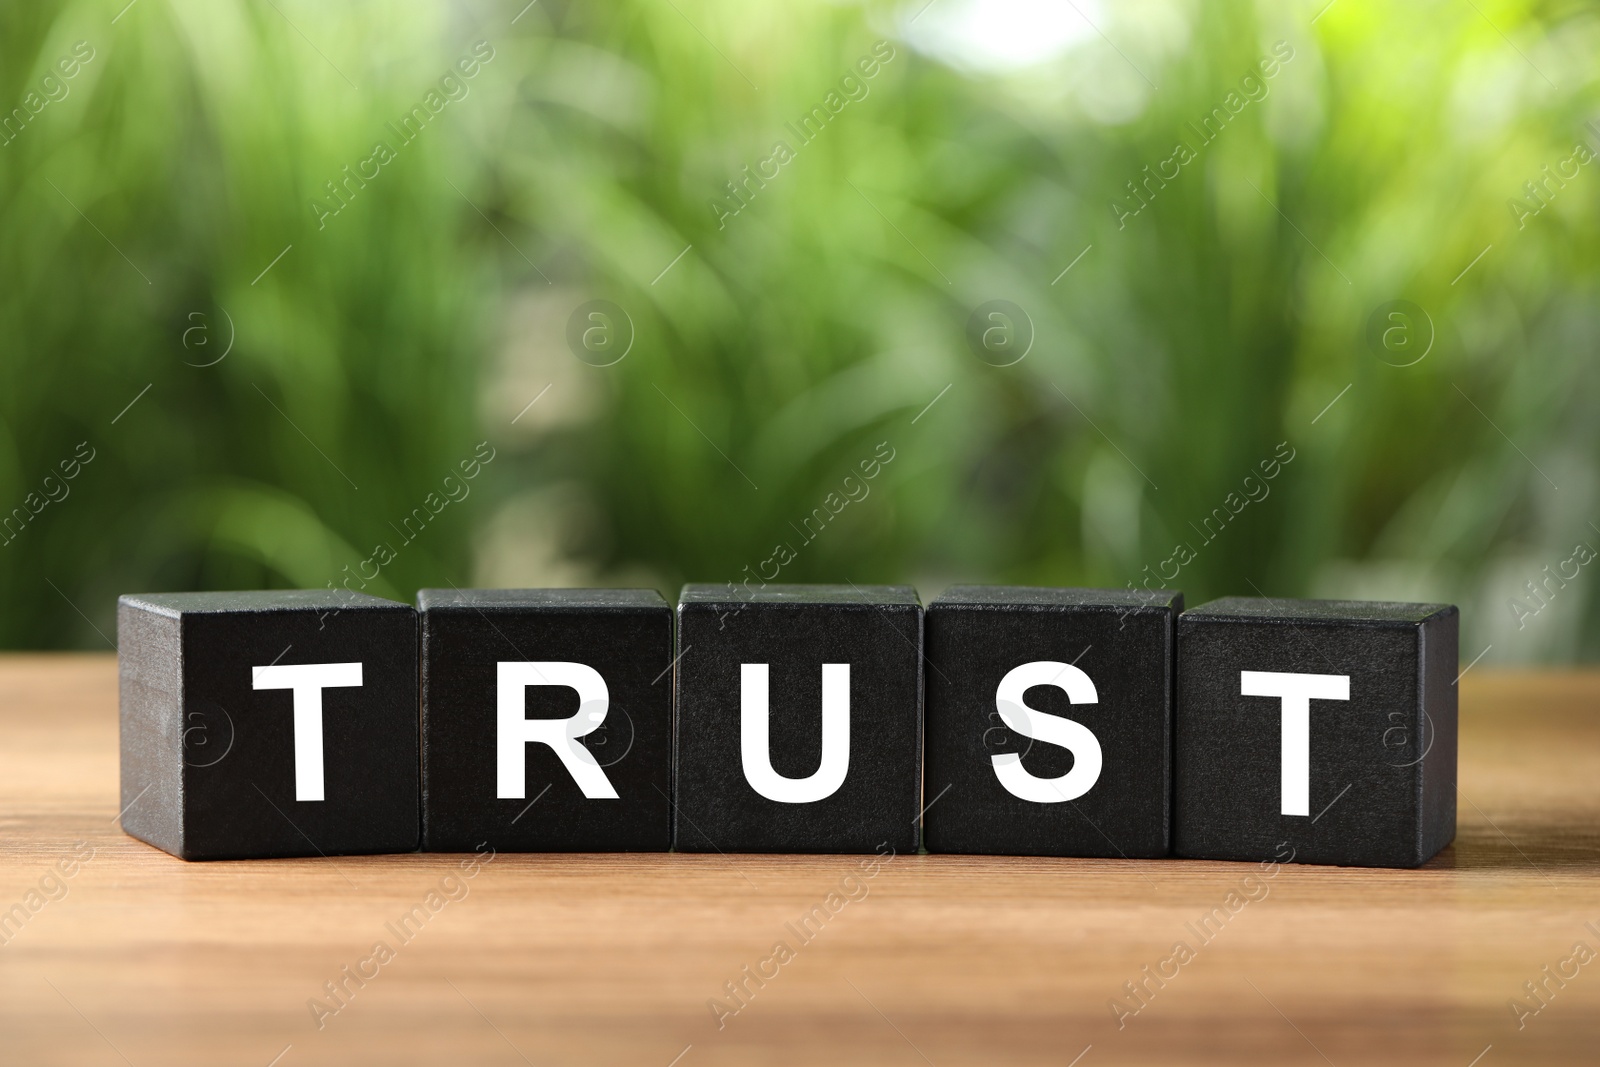 Photo of Word Trust made of black cubes on wooden table against blurred background